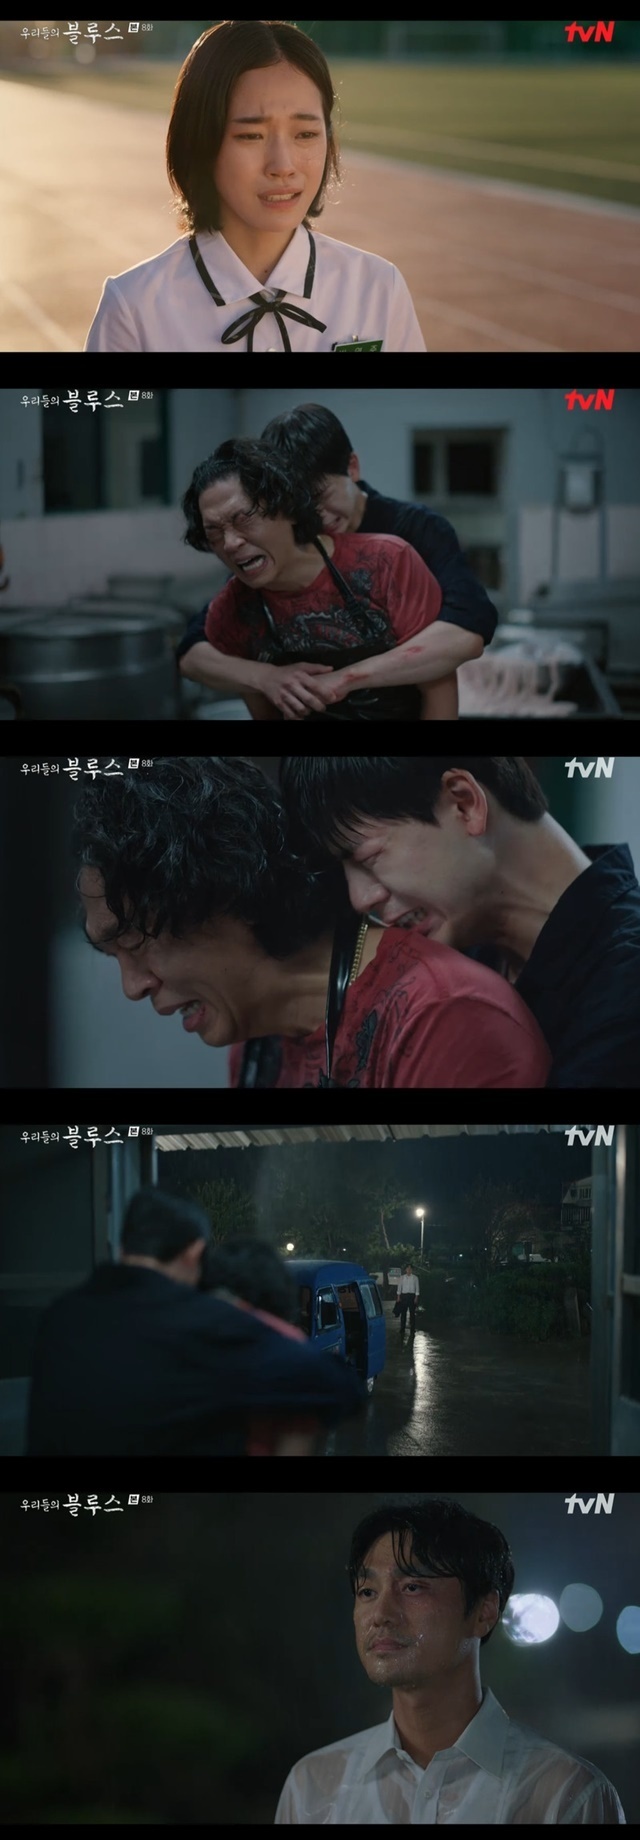 18-year-old Bae Hyun-sung and Noh Yoon-seo adhered to the birth and rang their fathers.In the 8th episode of TVNs Saturday Drama Our Blues (playplayed by Noh Hee-kyung/director Kim Gyu-tae) broadcast on May 1, Choi Jung-in and Choi Young-jun eventually broke the will of their son Chung Hyeon (played by Bae Hyun-sung) and daughter airing stock (played by Noh Yoon-seo) I couldnt.Choi Jung-in (Park Ji-hwan) and Choi Young-jun (Choi Young-jun) had a fistfight when their son Chung Hyeon (Bae Hyun-sung) and daughter airing stock (Ro Yun-seo) declared their pregnancy.Choi Jung-in and the protection ceremony raised the voice by blaming each others sons and daughters, and all the market people knew that the airing stock was pregnant with Chung Hyeons child.The defense ceremony gave her daughter, Airing Stock, two bankbooks with all her assets, and forced her to operate as I live well with my child, and Airing Stock insisted that she would go to college with a child, saying, I live well with my child.When the defense ceremony forced choice between the father and the bump, the airing stock said, So I am a bump. Good.Im good, he said.The airing stock went to the motel where Min Sun-ah (Shin Min-ah) was staying and Chung Hyeon came to say, Our Father will eventually come to pick me up.You could make Father angry. Go. Ill study. But the guard didnt pick up his daughter after the owner called.The next day, the airing stock was out of the house because of the cold, and Chung Hyon went to work part-time at the tangerine farm without going to school and was teased by local adults saying, Did you really sleep with the lord?Kang Ok-dong (Kim Hye-ja) held Chung Hyeons hand and comforted him.Min Sun-ah picked up the bag that the airing stock accidentally encountered and said, Congratulations when she found out that the airing stock was pregnant.Choi Jung-in, knowing that the airing stock was in the motel, went to the hospital and dragged his wrist and forced him to take him to the hospital.Chung Hyeon was angry at him and hit his father and shouted, I am ashamed. I have been ashamed of Father for the rest of my life.The guard came to his daughter, airing stock, and then punched Choi Jung-in, who was seen.Choi Jung-in and his defense were trapped in a police station, and when his wife ran away from gambling in the past, Choi Jung-in called himself a Model Behavior young man with a daughter when he became a Model Behavior.The defense ceremony said, How about being hit by my son? You want to die? My heart is that mind at that time.Choi Jung-in was chewing on the horse of the protection style and fell on the stairs, and the protection ceremony went to the hospital with such a Choi Jung-in.Choi Jung-in Kwon was diagnosed with acute diabetes.The guard went to the school of the daughter airing stock, and the homeroom teacher persuaded the school to accept the airing stock, so he asked for his daughter.But the defense ceremony gave her daughter, Airing stock, a house, but she said, It is not your life that is your life.Im not going to say I did anything wrong if I died. I cant say my Christina Aguilera died a mistake. Im so sorry, Father.I am so sorry that Father is all I have in this world and I am lonely. But Father, I am so lonely.I have Hyun and Christina Aguilera, but I am so lonely because I do not have Father. The protection ceremony also shed tears as I listened to it.